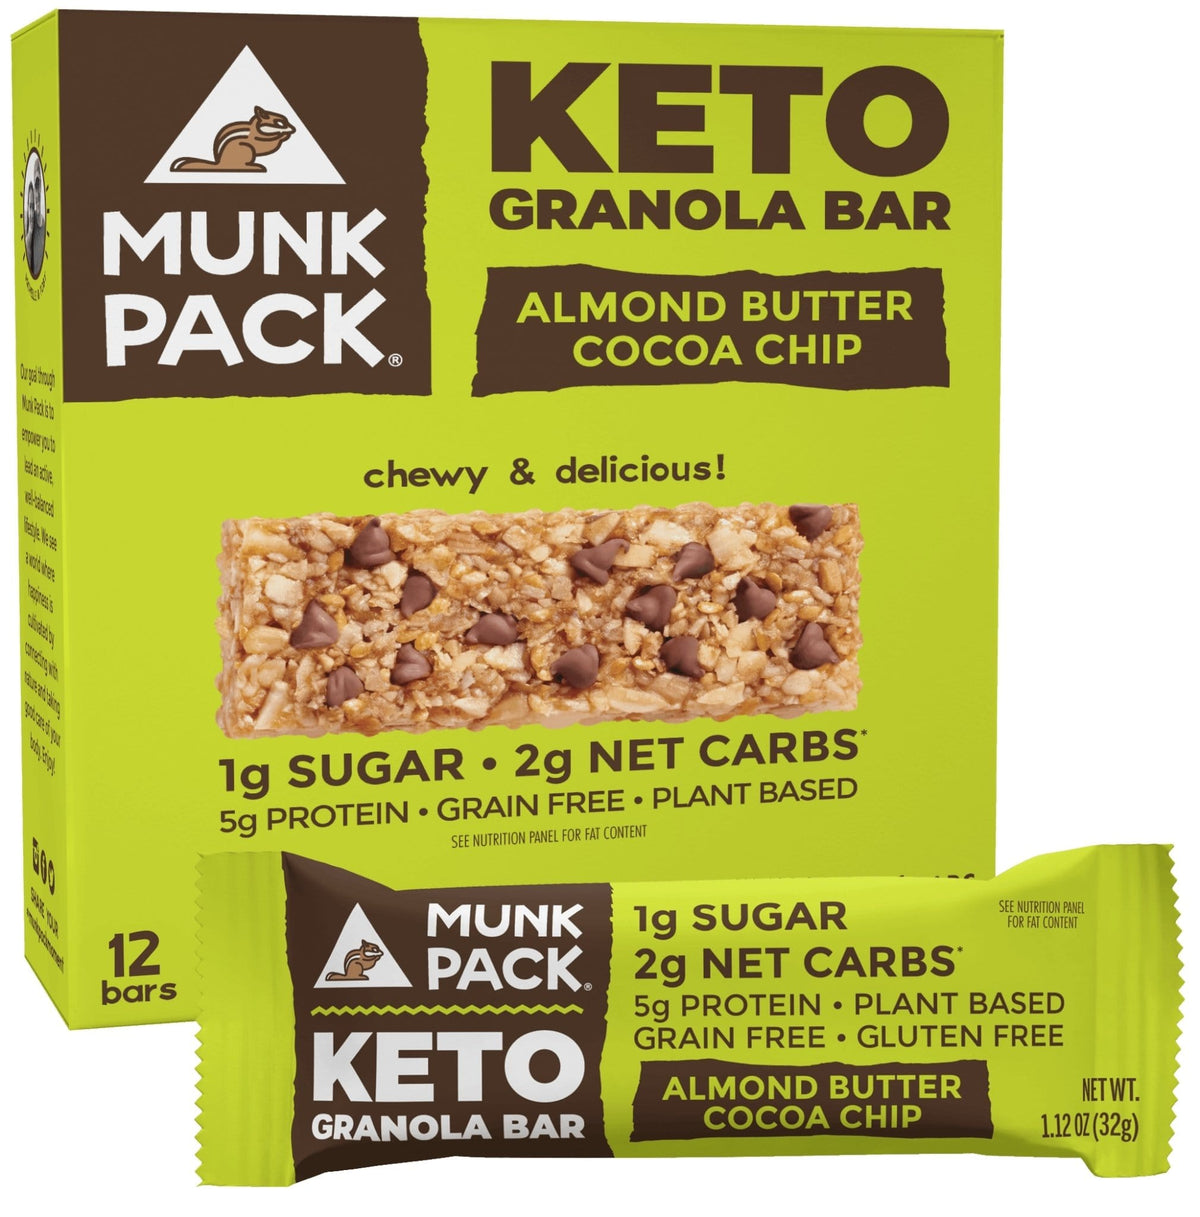 [Munk Pack] Almond Butter Cocoa Chip Keto Granola Bar | 12-Pack |